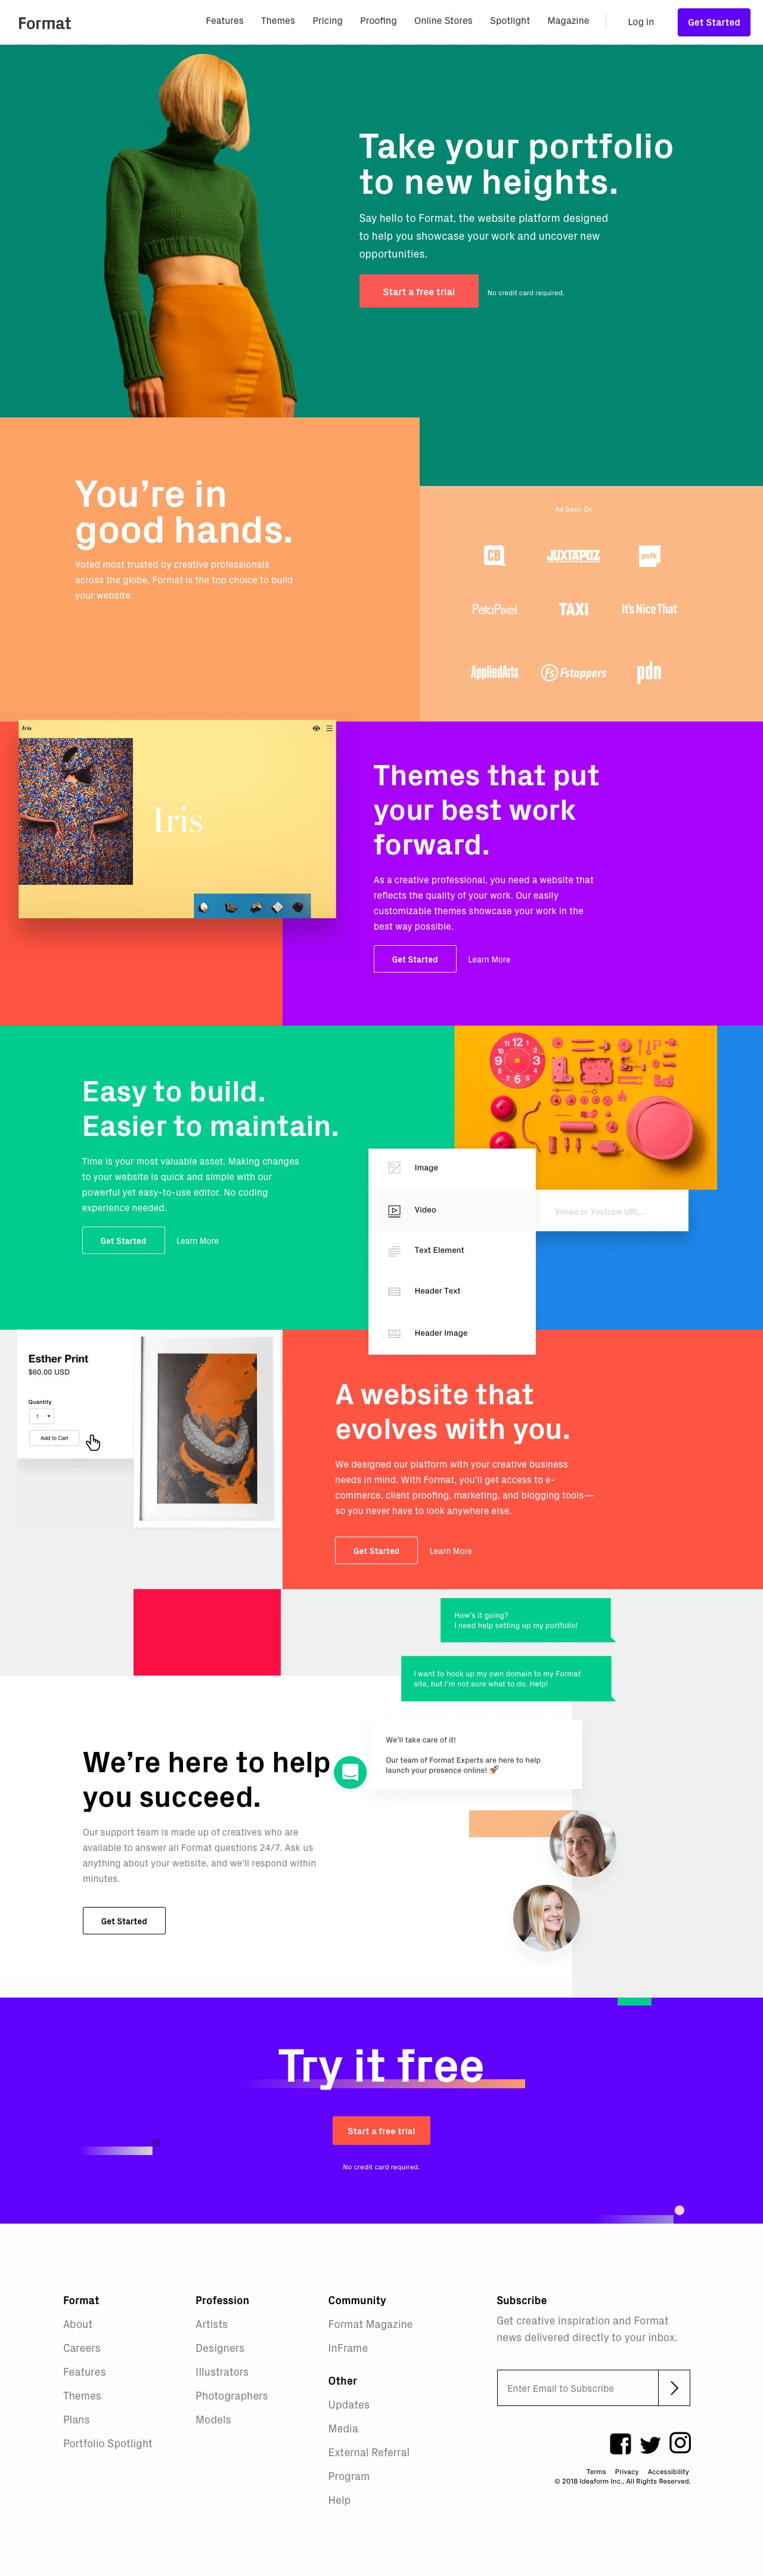 Format Landing Page Example: Say hello to Format, the website platform designed to help you showcase your work and uncover new opportunities.